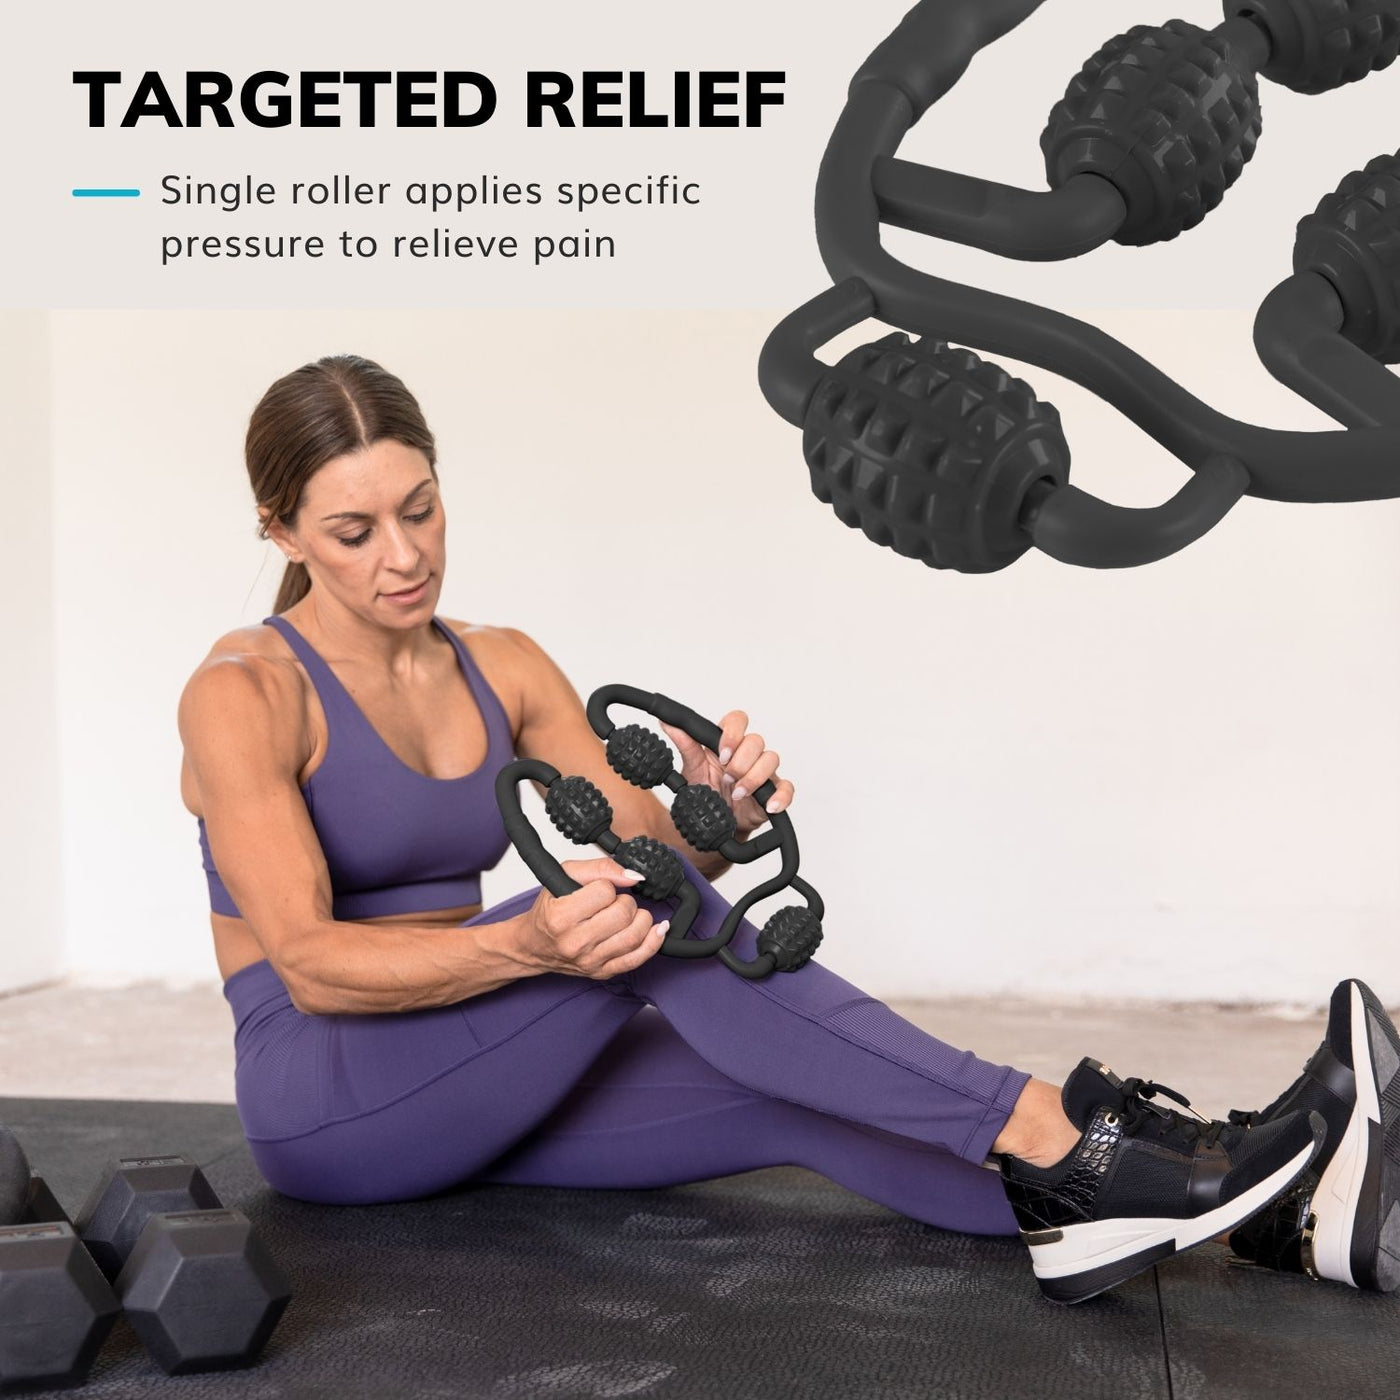 Our trigger point massager has a single roller on the top to apply target pressure to relieve pain